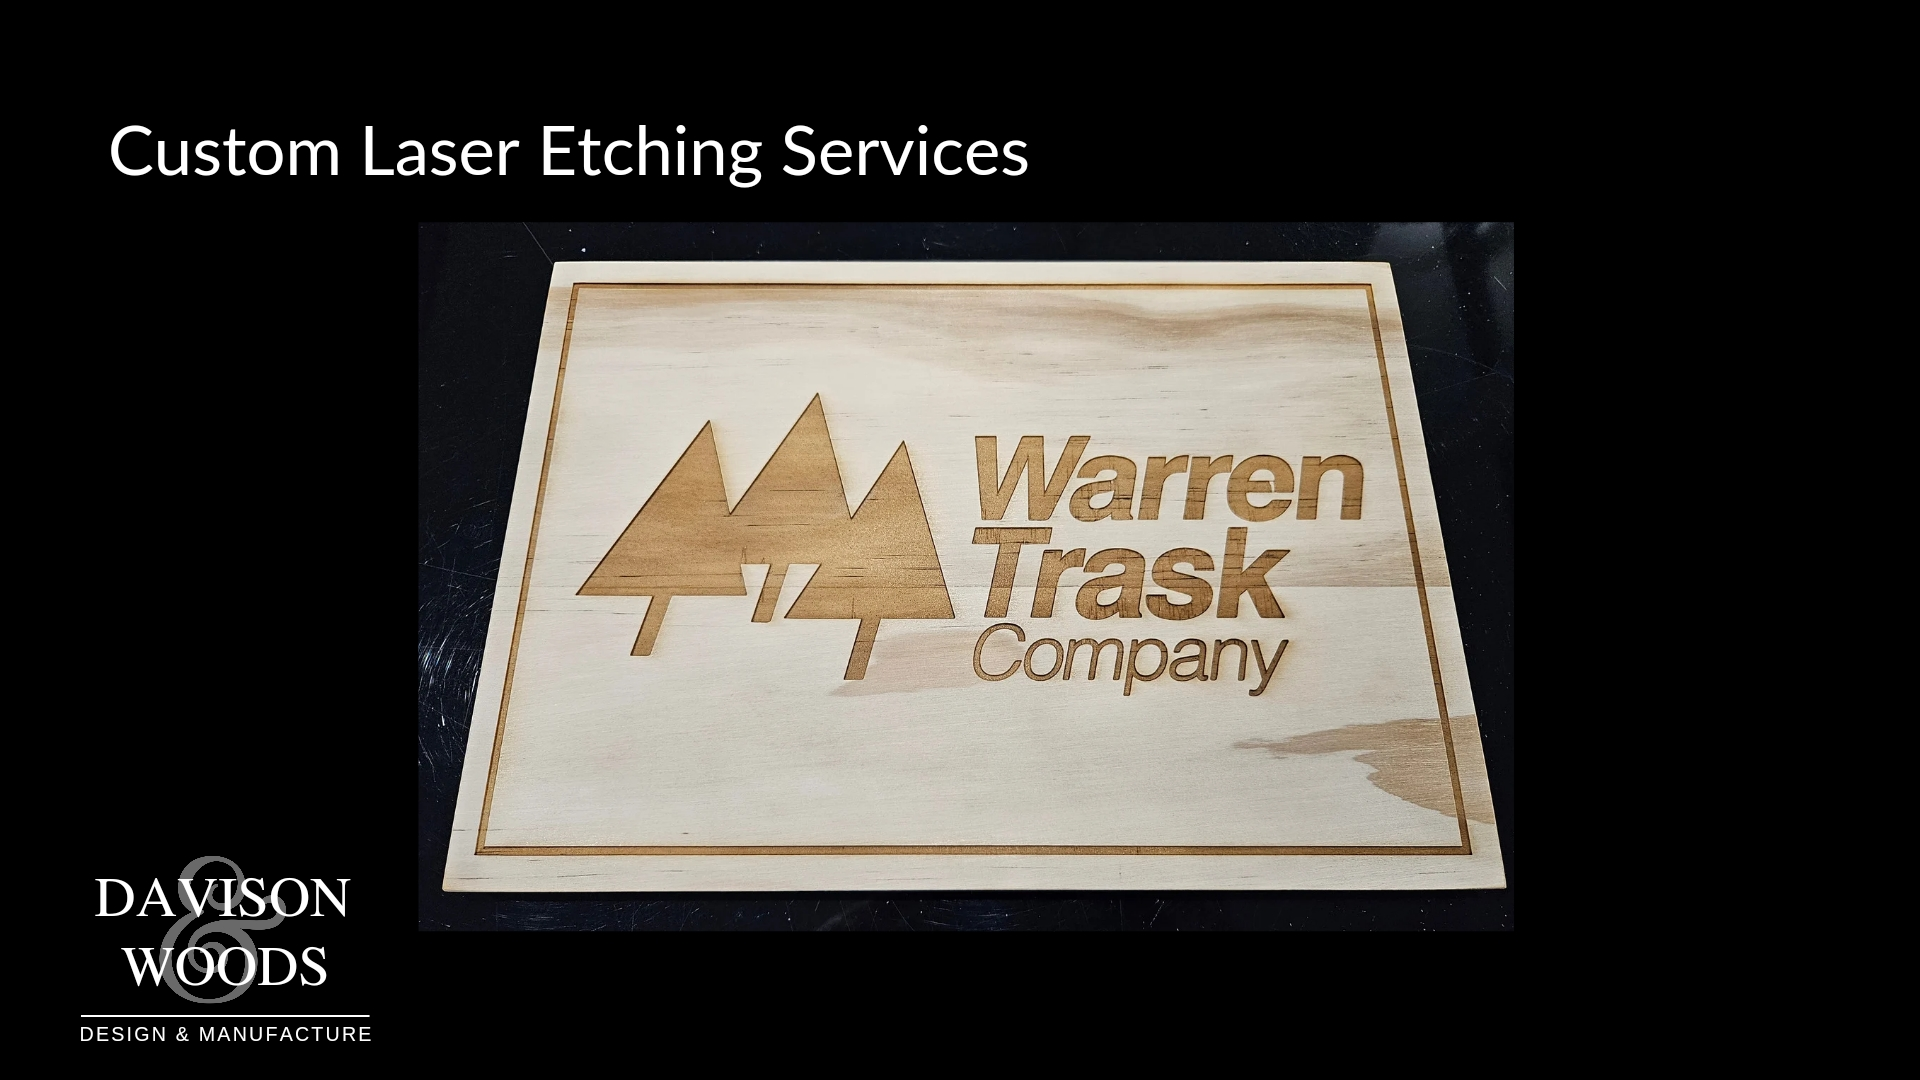 Custom Laser etching services. Light natural wood with Trask Company laser etched on the surface.